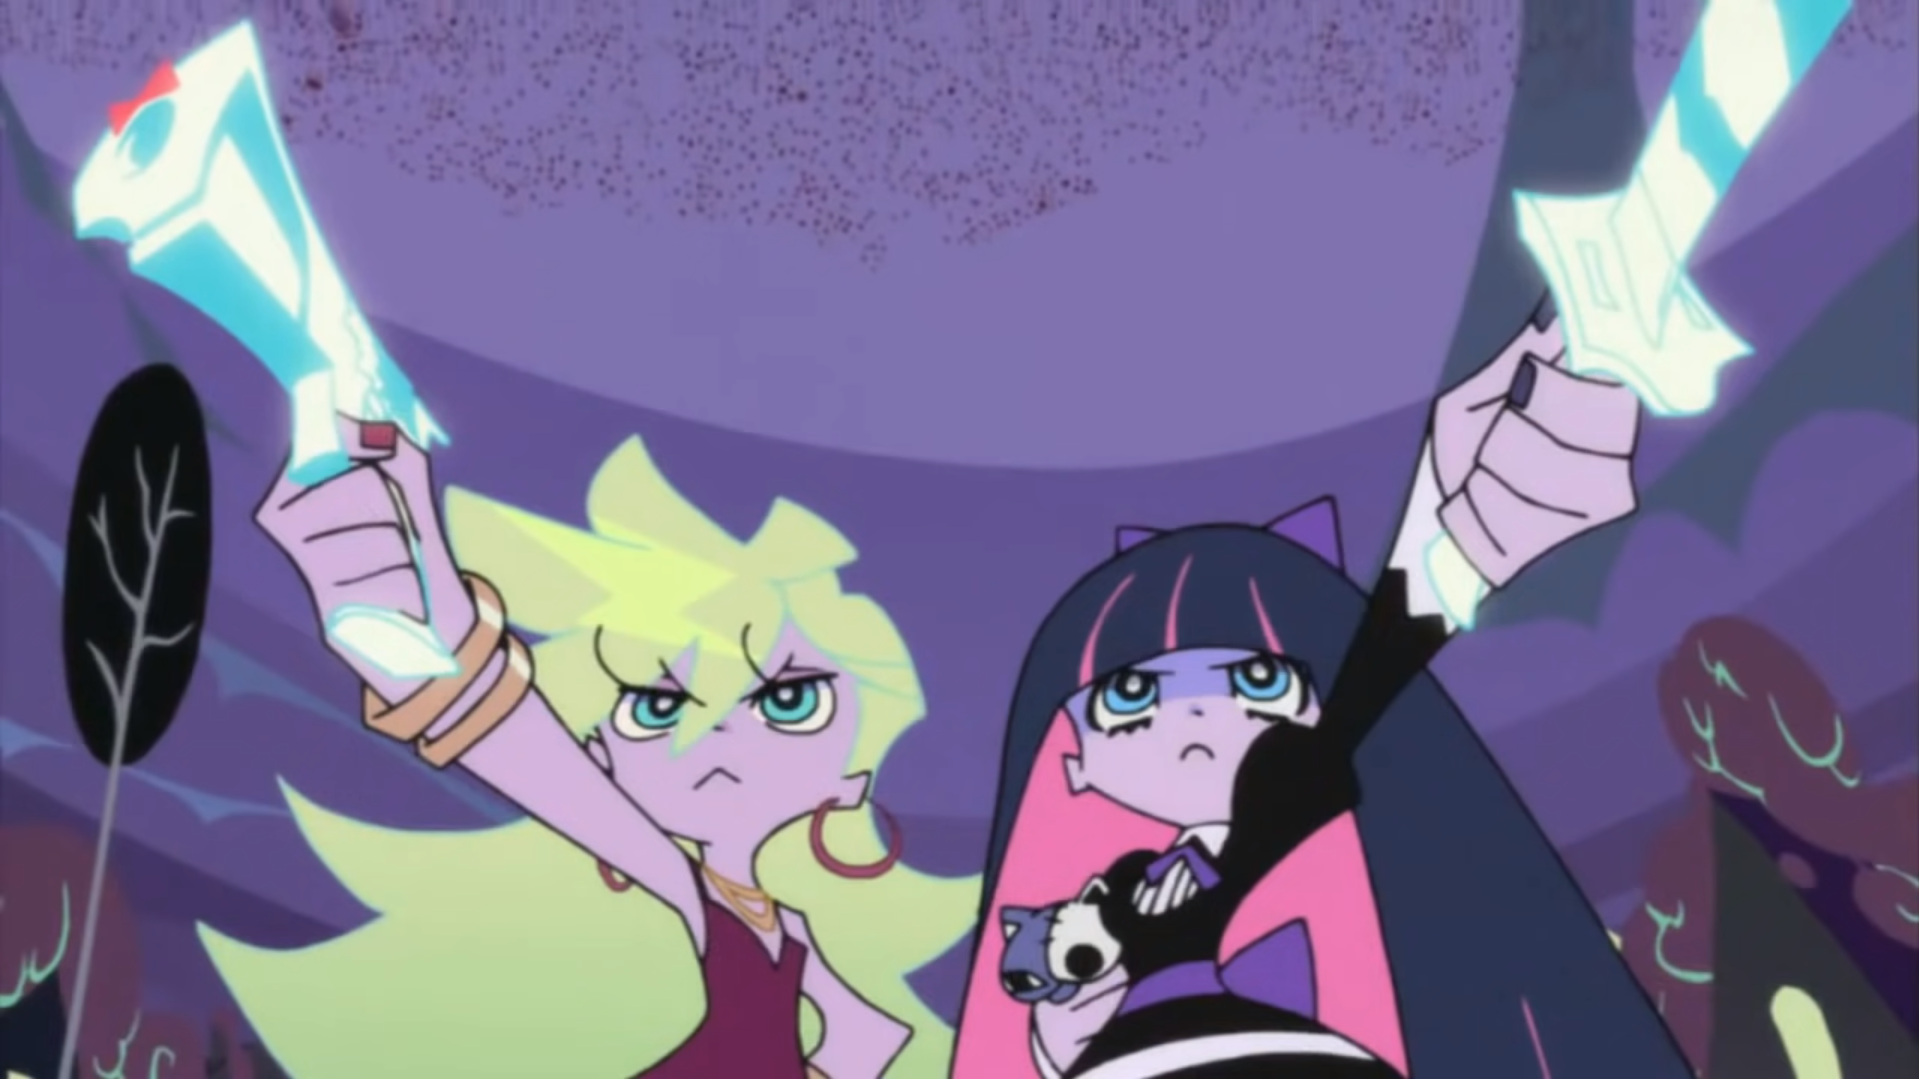 Panty and Stocking's weapons